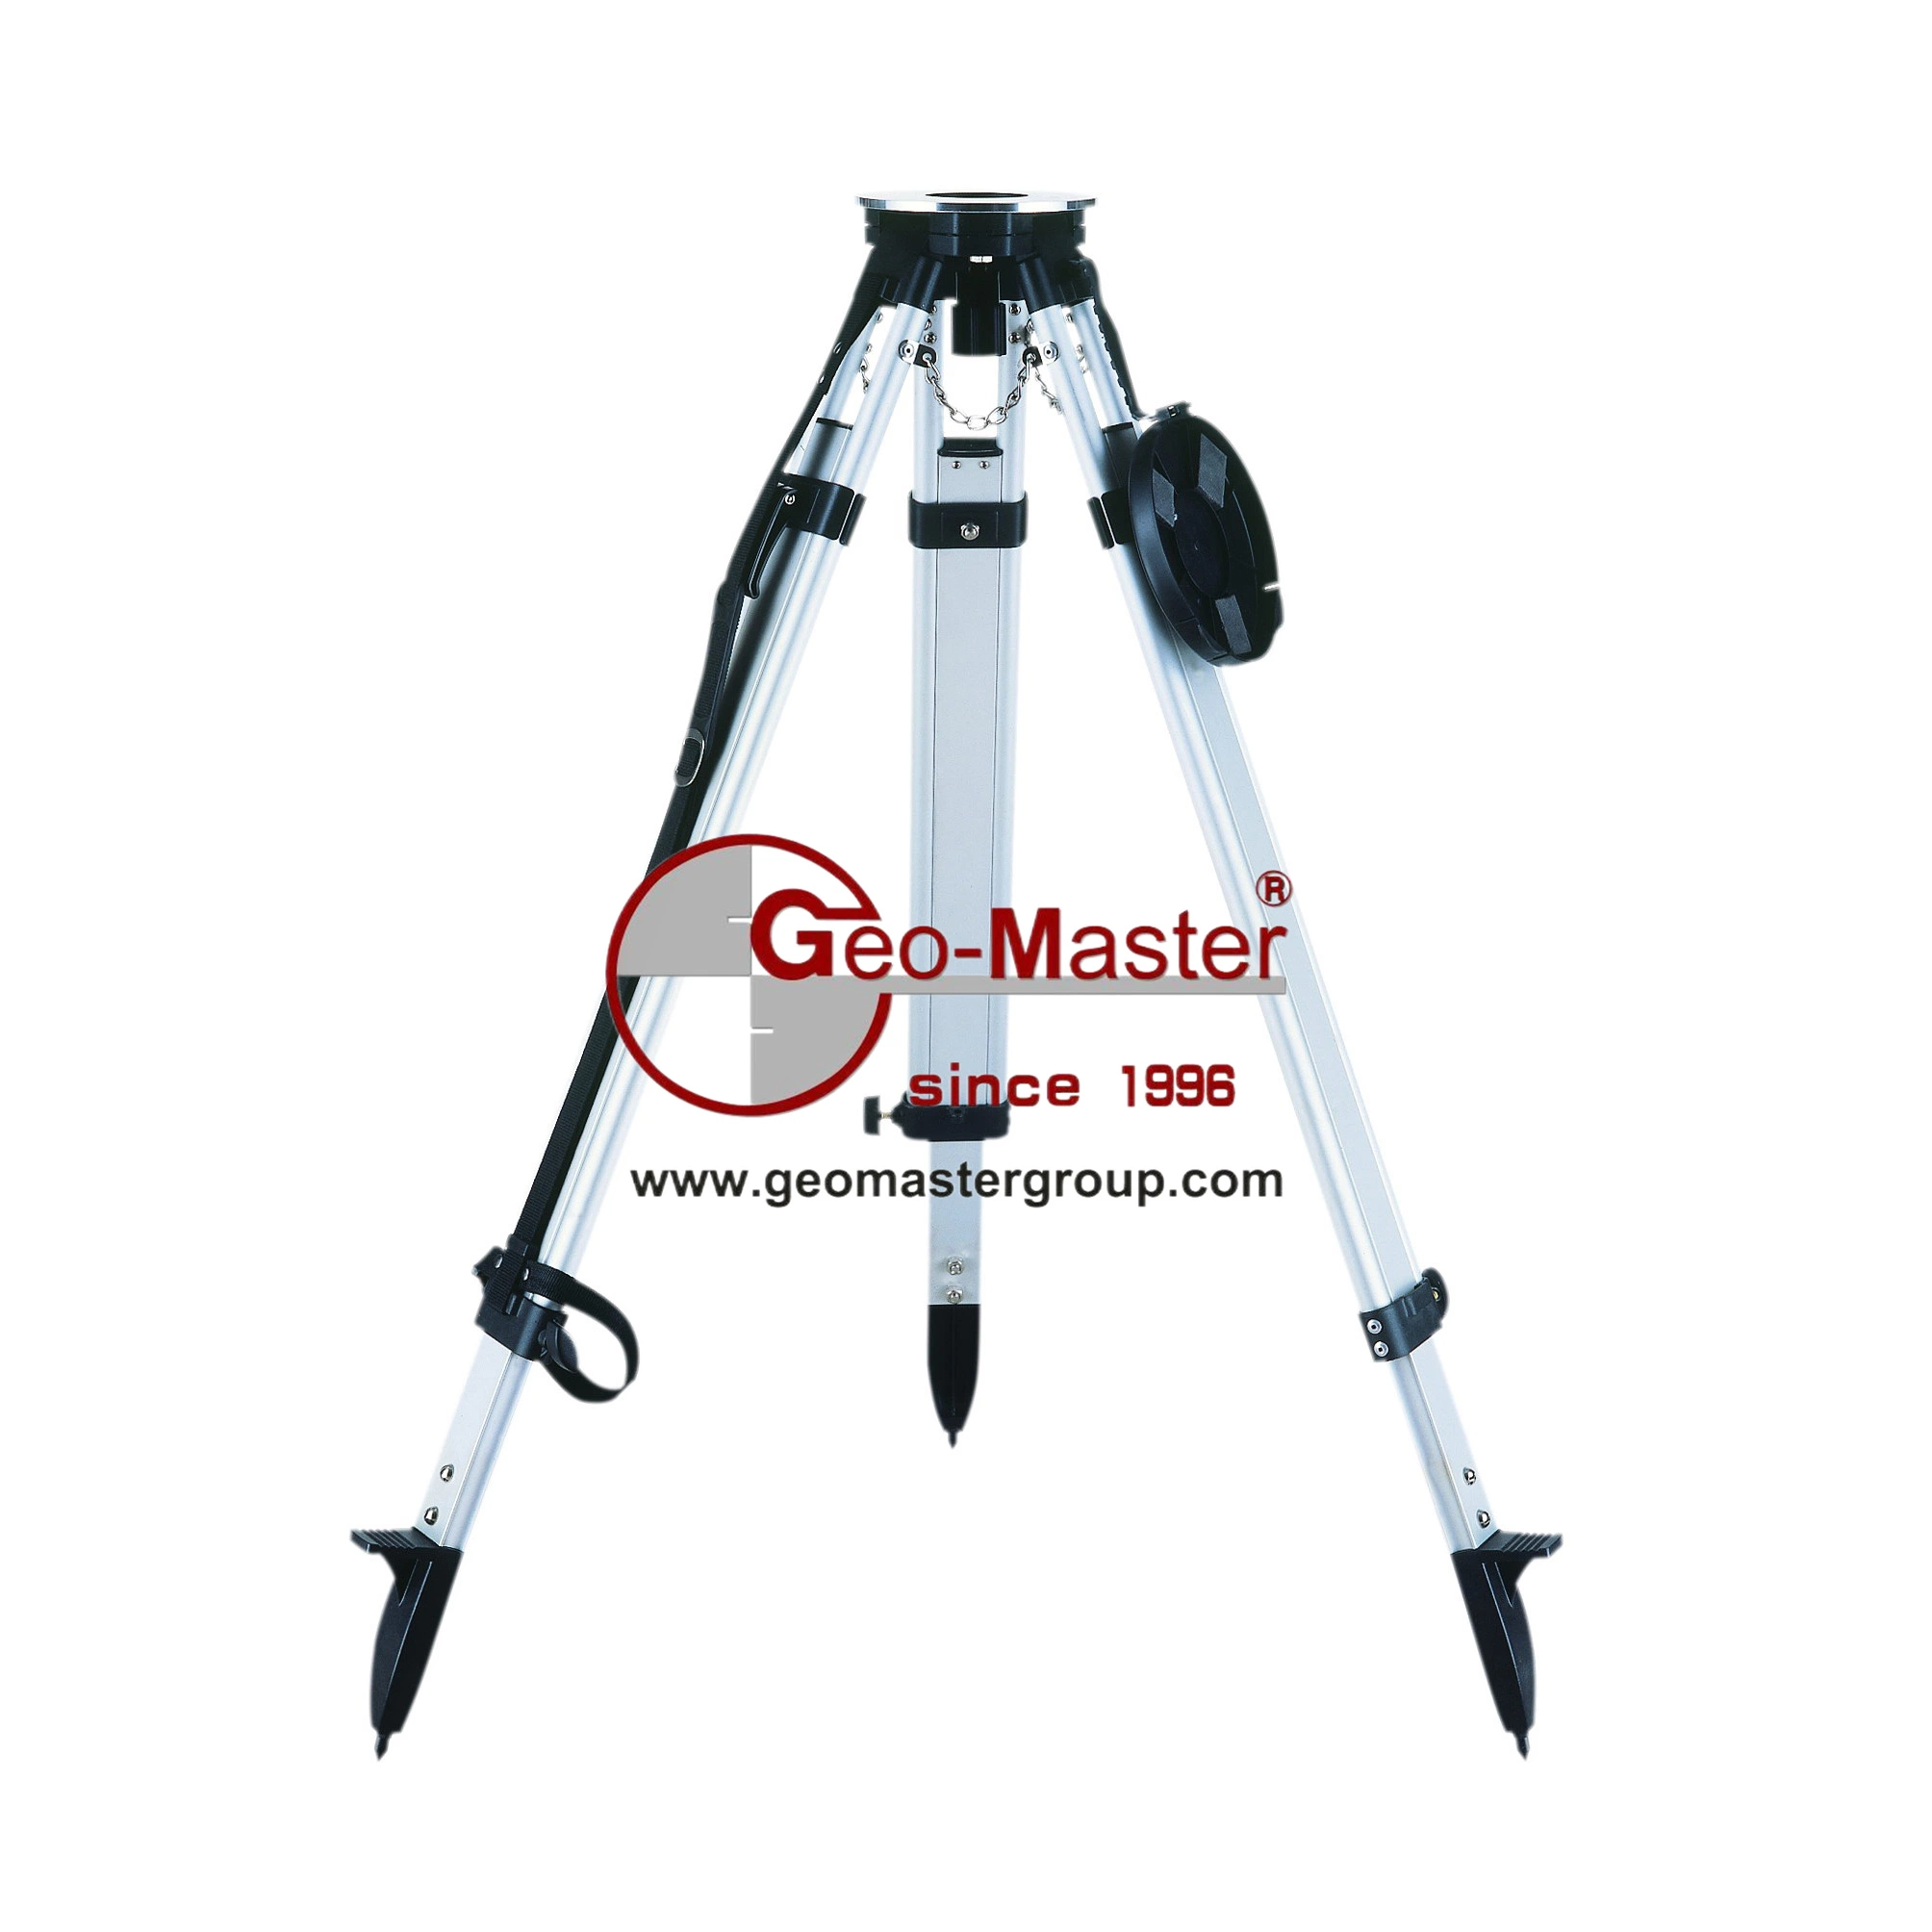 Geomaster Heavy-Duty Aluminum Tripod for Surveying Instruments, Total Stations, Laser Theodolites, Laser Scanners